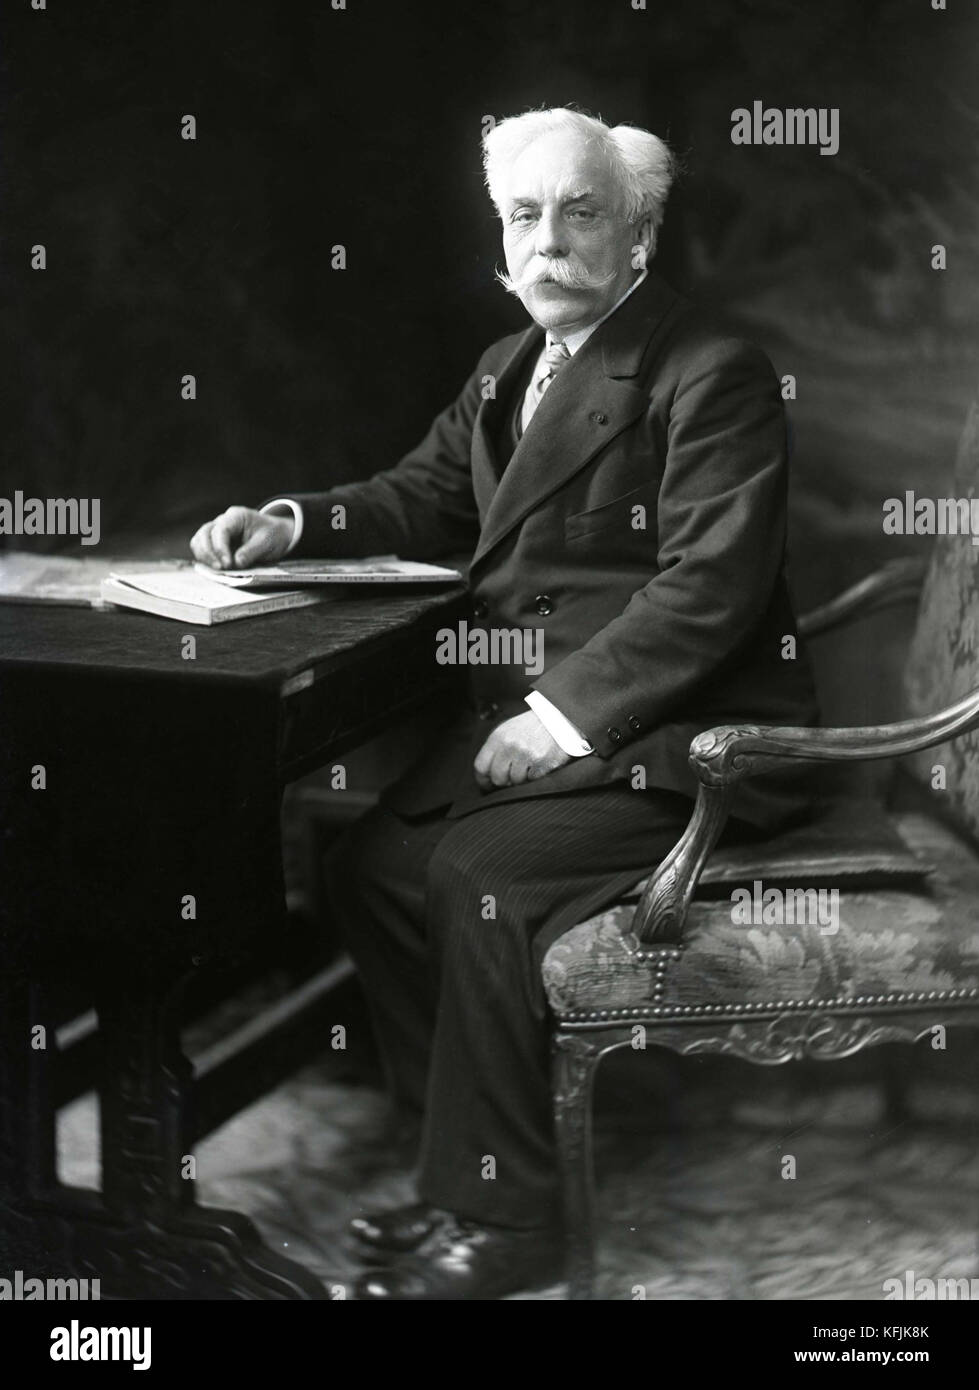 Gabriel Fauré (1845-1924), French composer.  c.1905    Photo Taponier credit:Photo12/Coll. Taponier Stock Photo